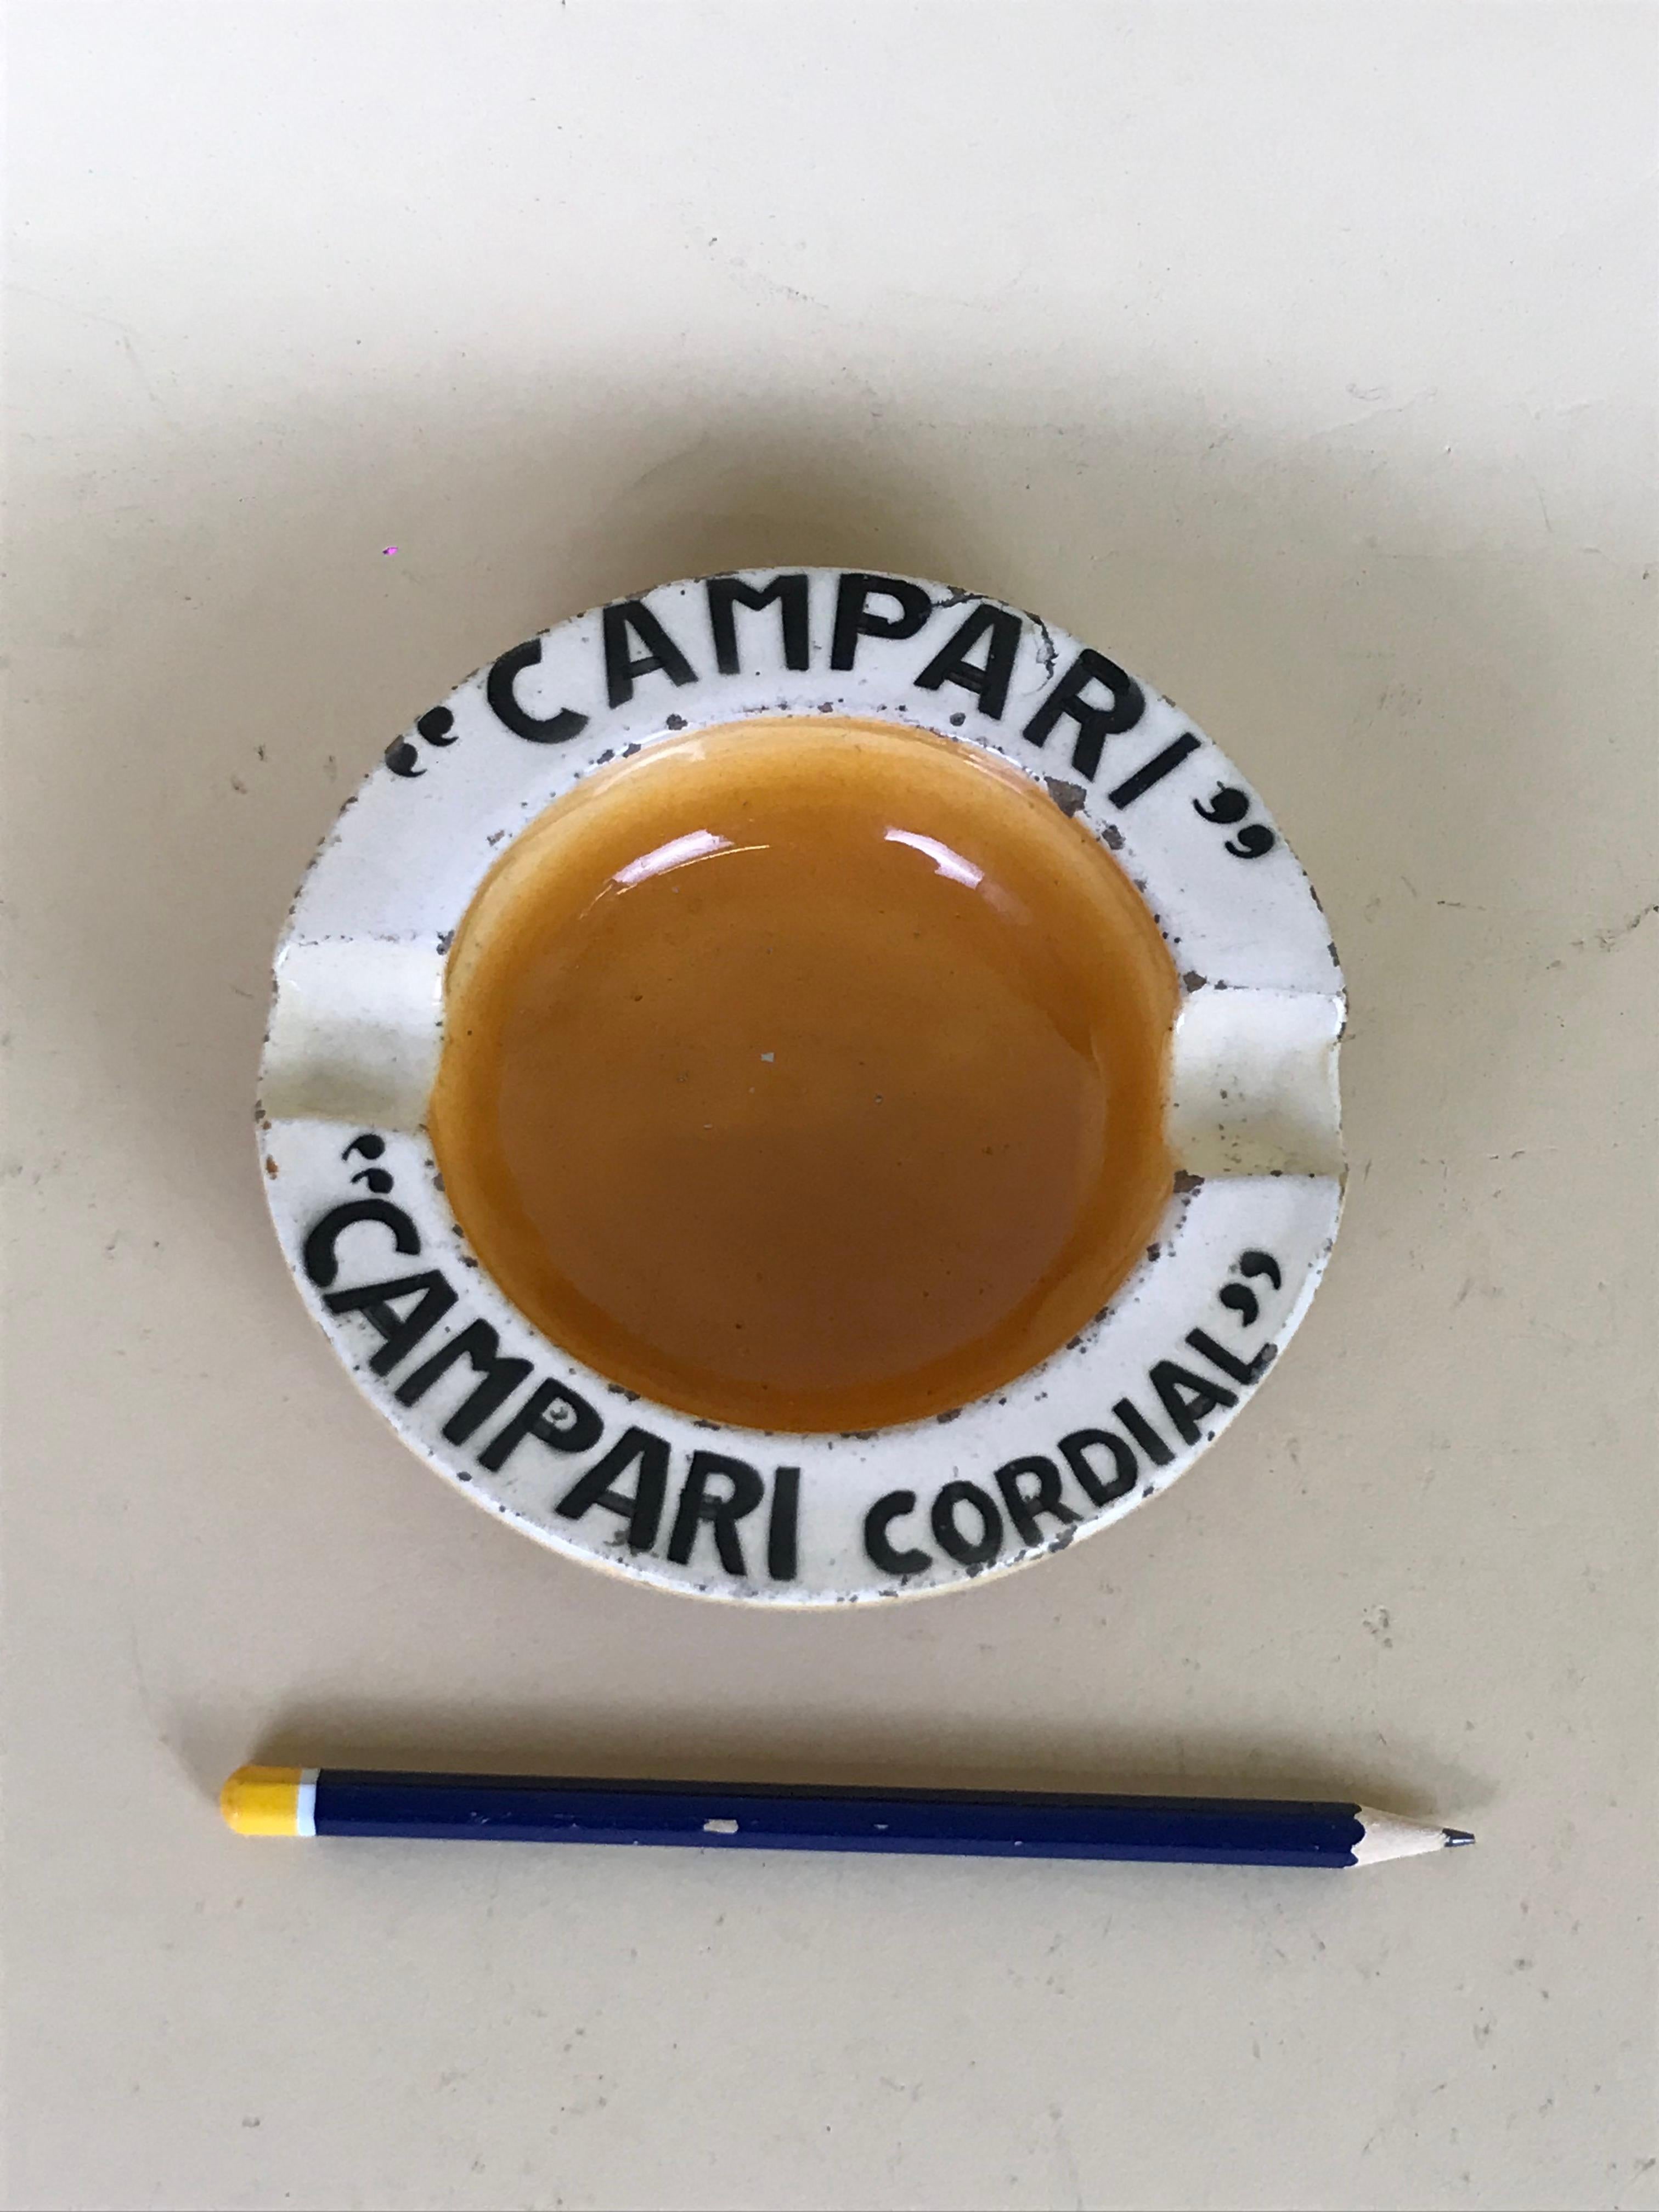 Vintage rare Campari Cordial advertising ashtray in yellow-brown and white ceramic made in Italy in 1940s.

On the top border 